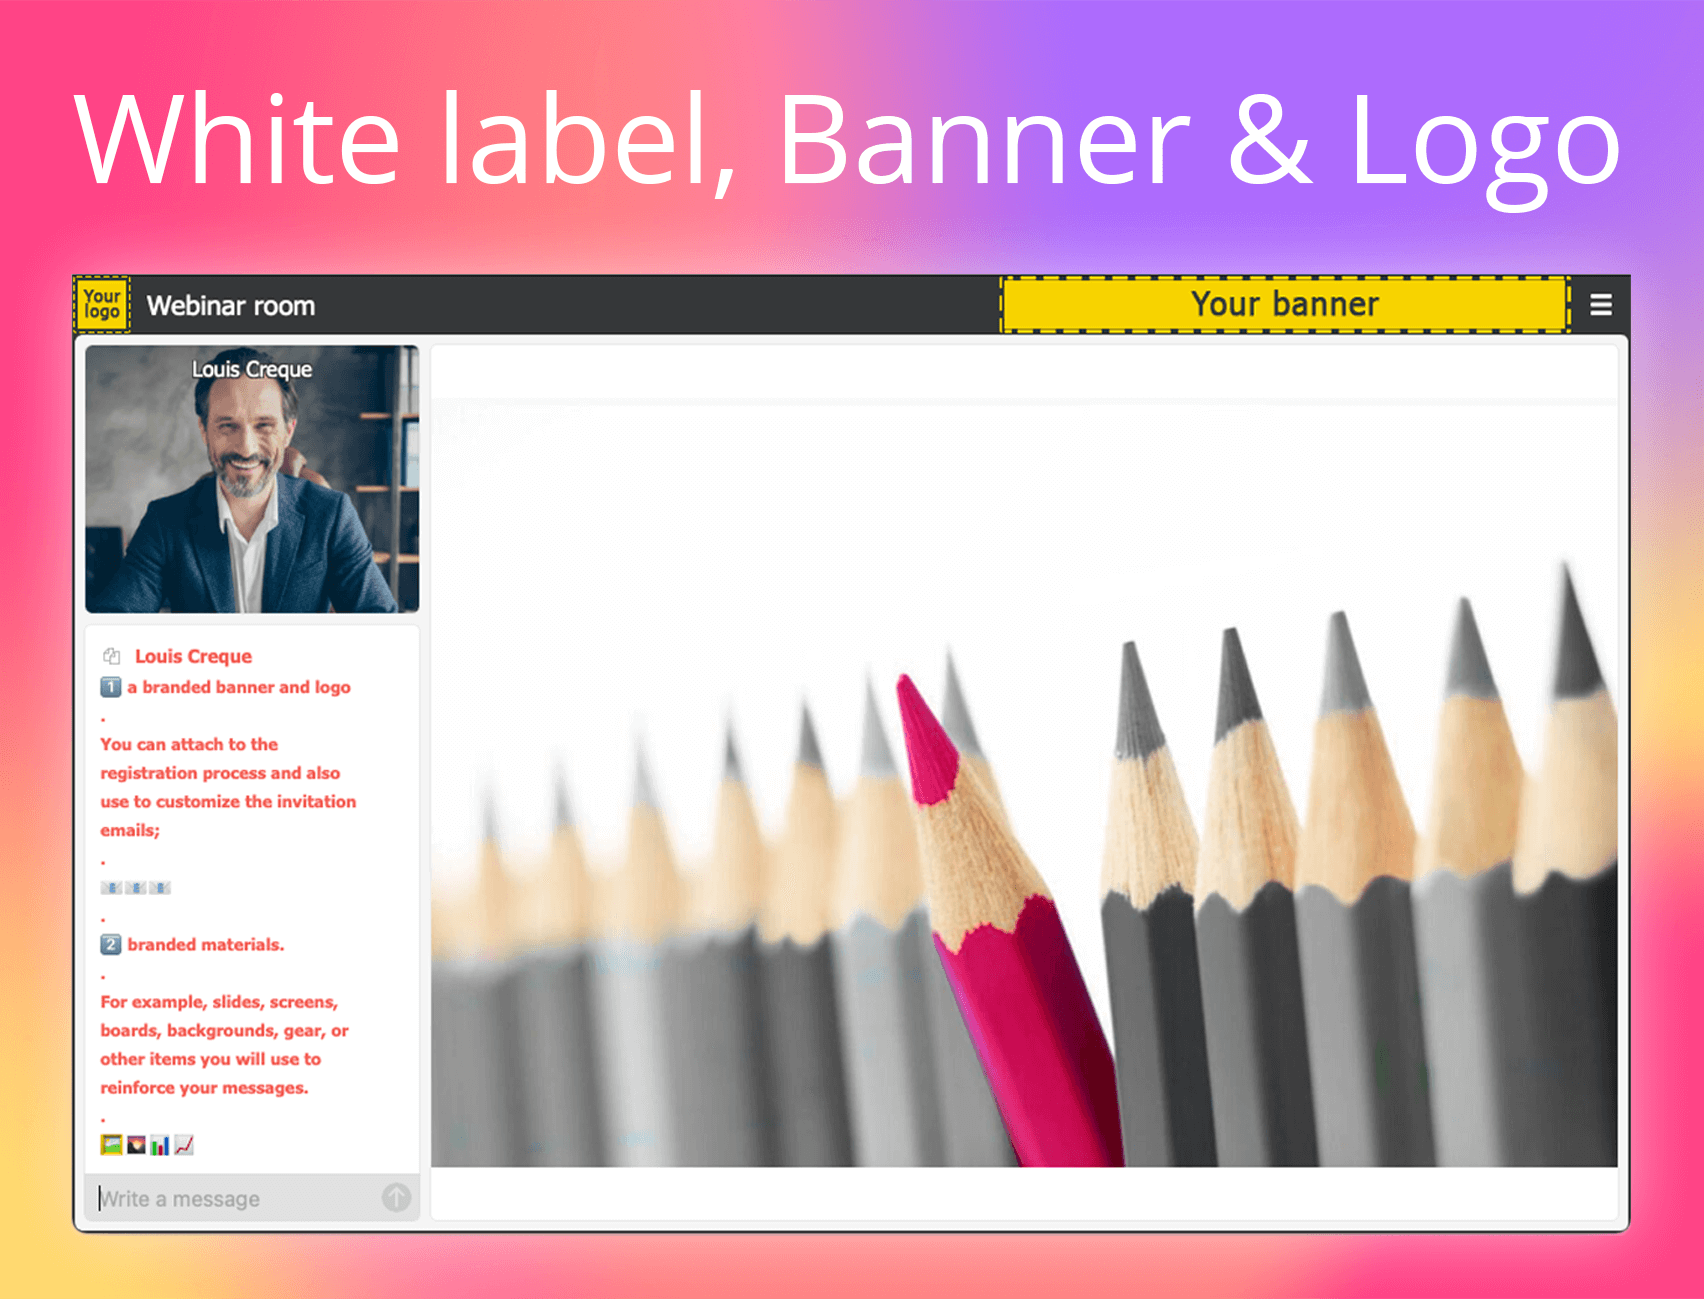 MyOwnConference Software - Make it yours! White label your webinar. Add your banner and logo for a bespoke feel. Don't have time? No Problem. We have a range of backgrounds to choose from.